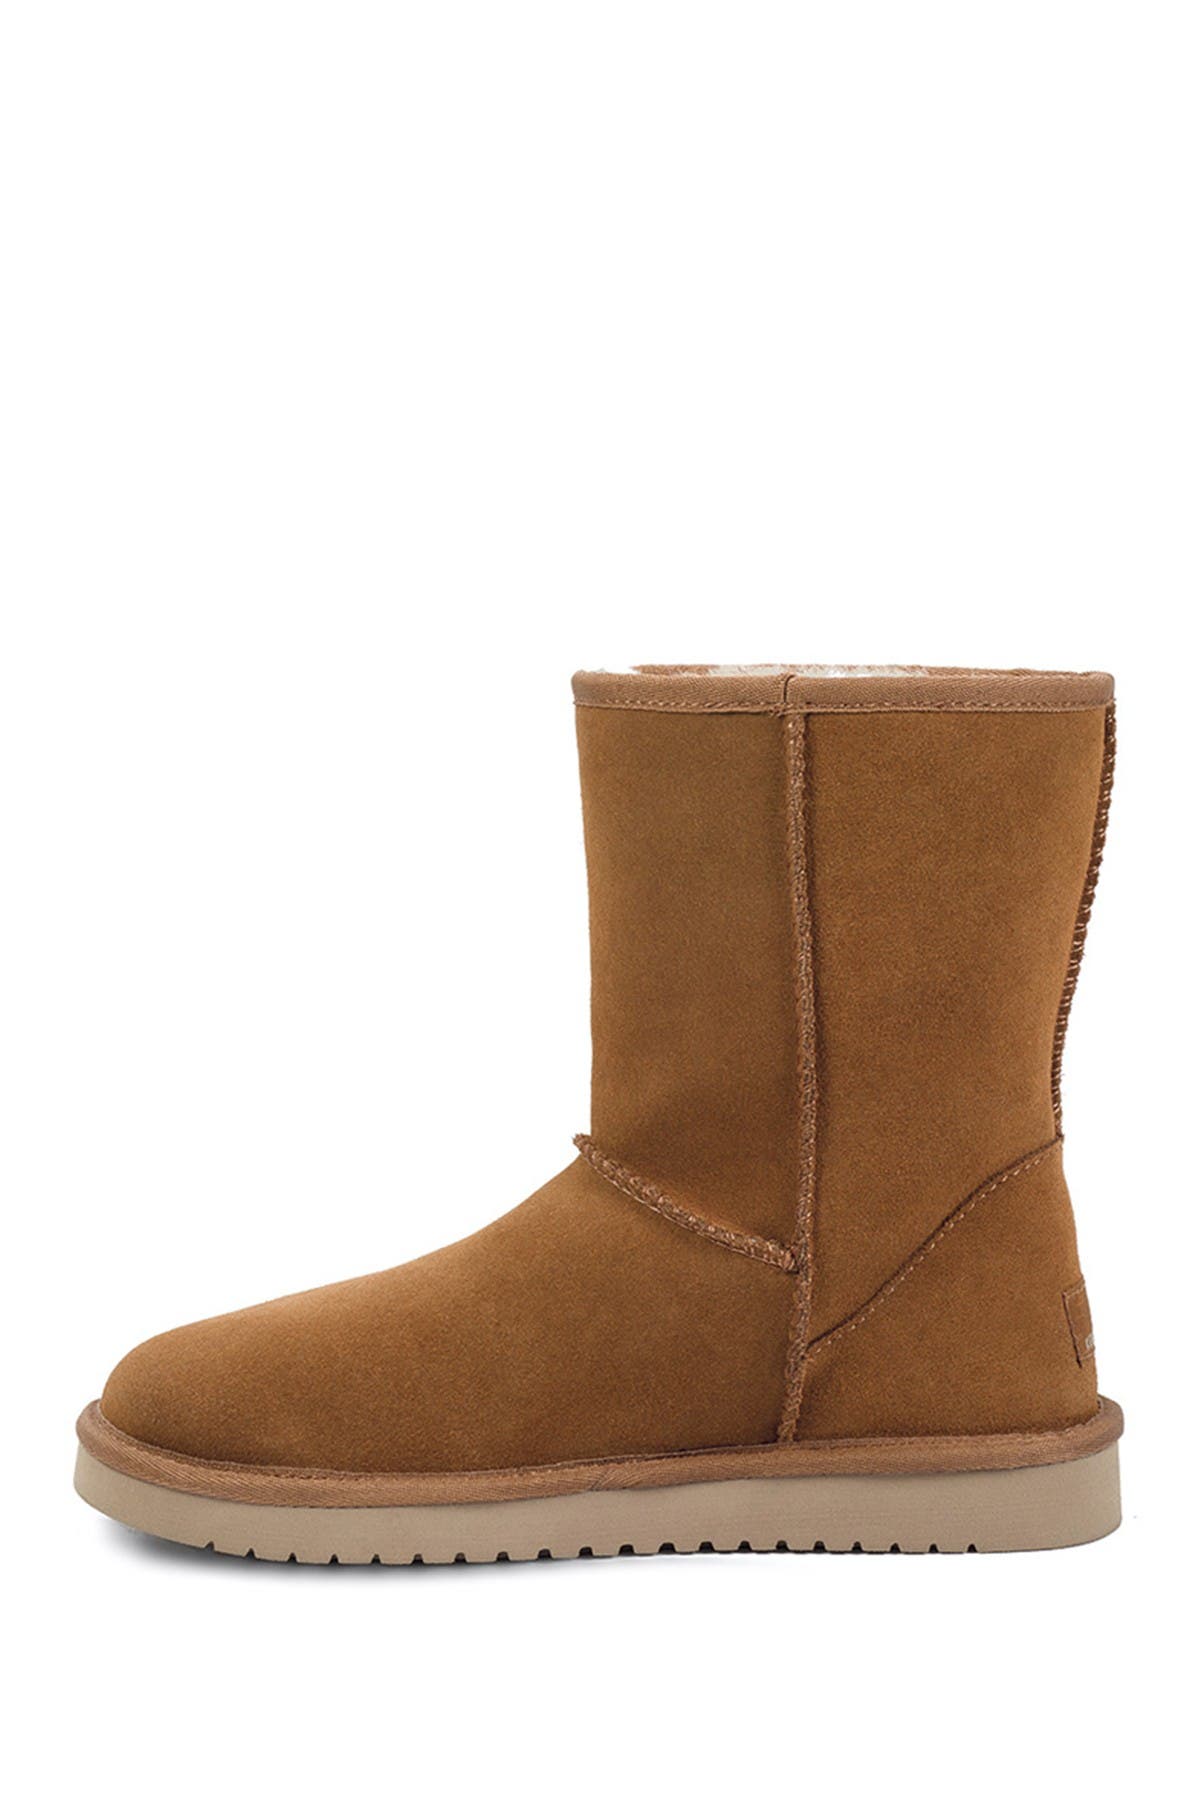 wide width ugg style boots